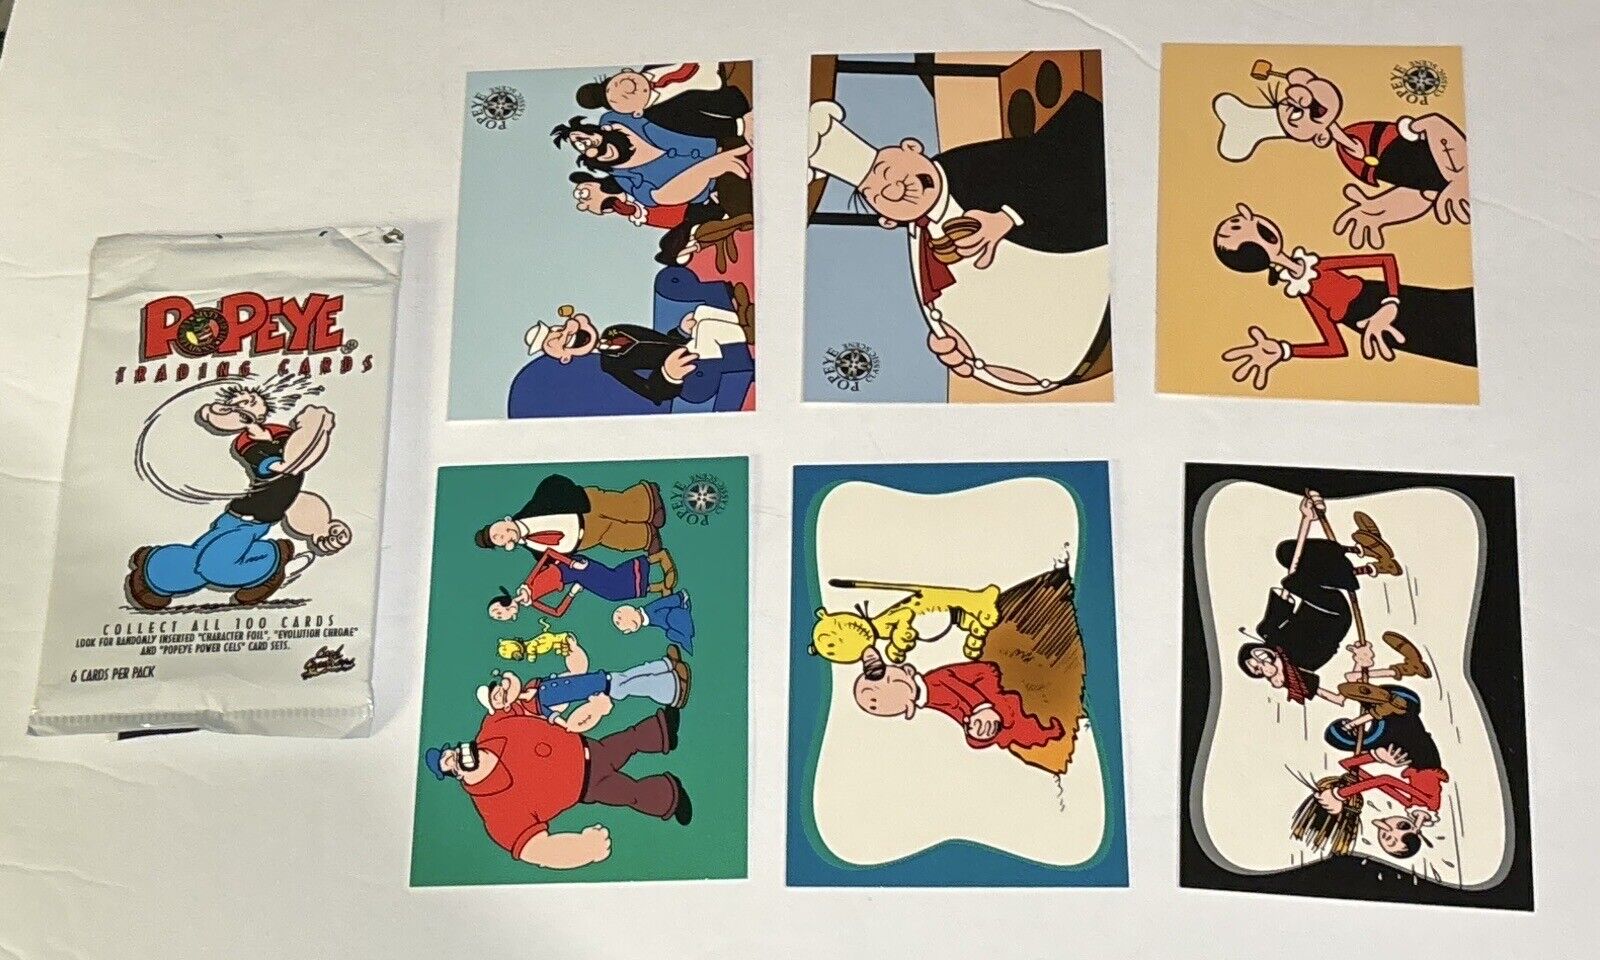 Vintage Lot (6) Popeye the Sailor Man Card Creations; Olive Oil/Bluto/Swee’ Pea